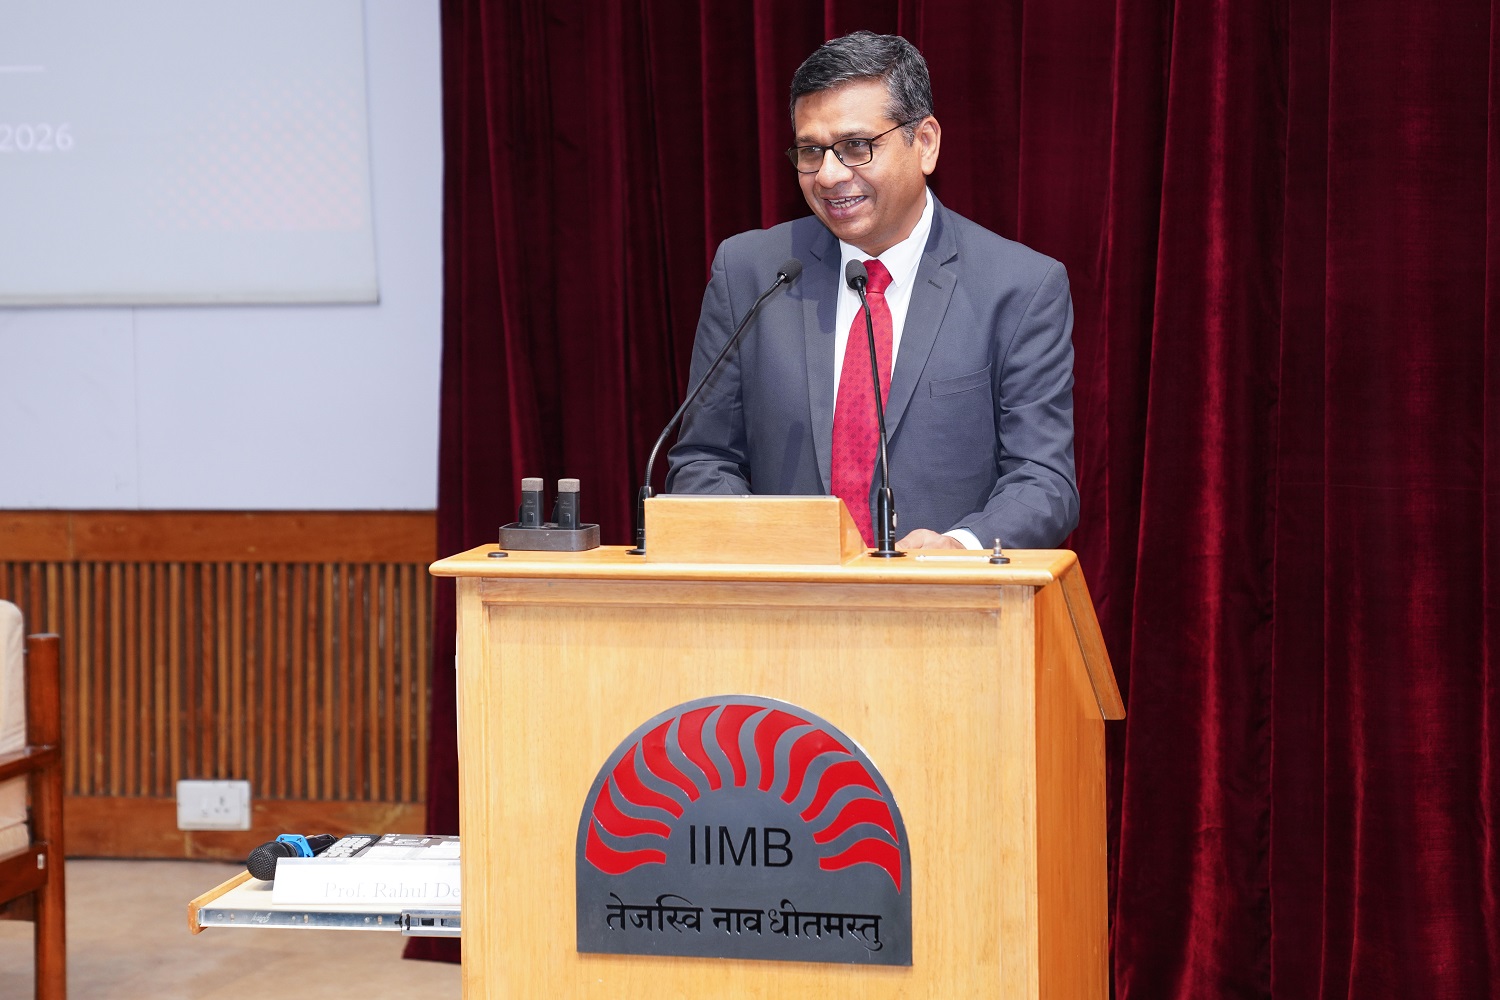 Chief Guest Jay Doshi, Managing Director, Corporate Units, Digital, and India at BT Group, alumni of IIMB’s PGSEM, delivered the keynote addresses.